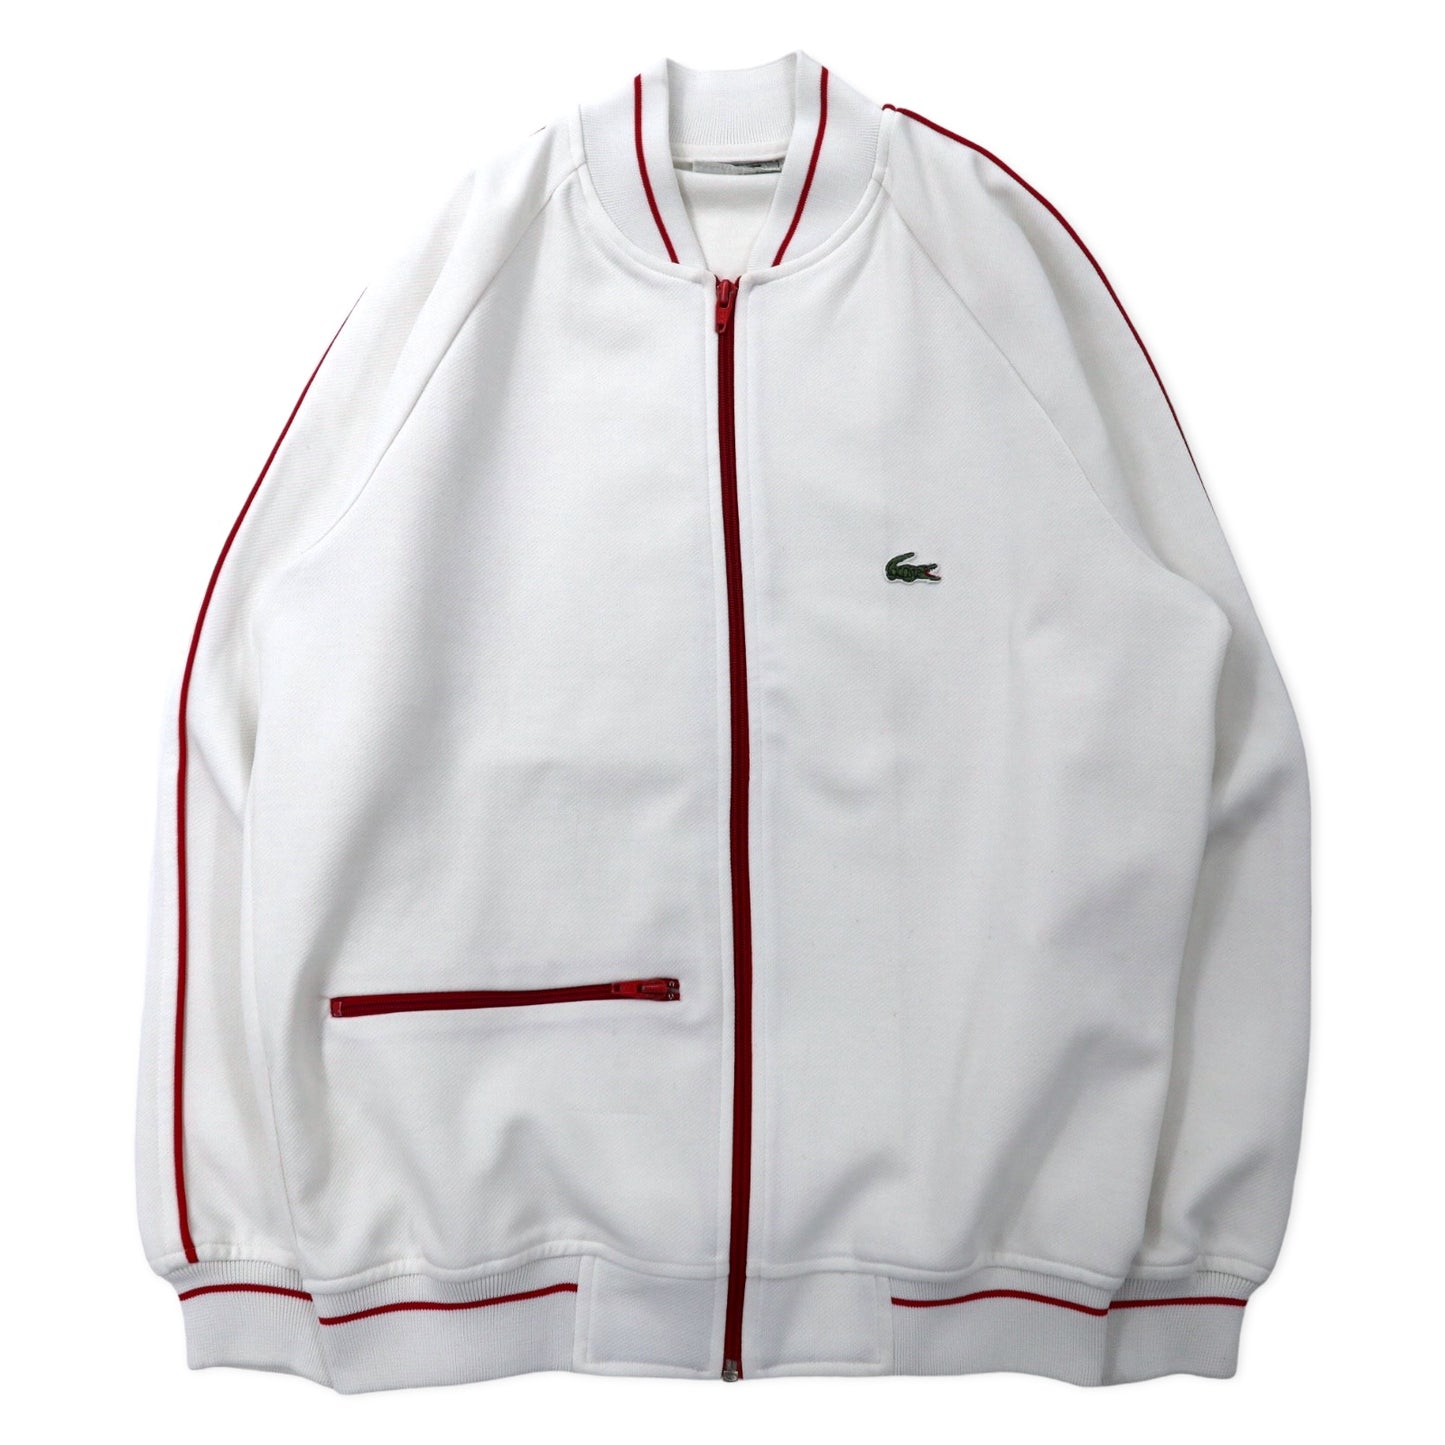 Chemise Lacoste 80's TRACK JACKET Jersey M White Polyester One